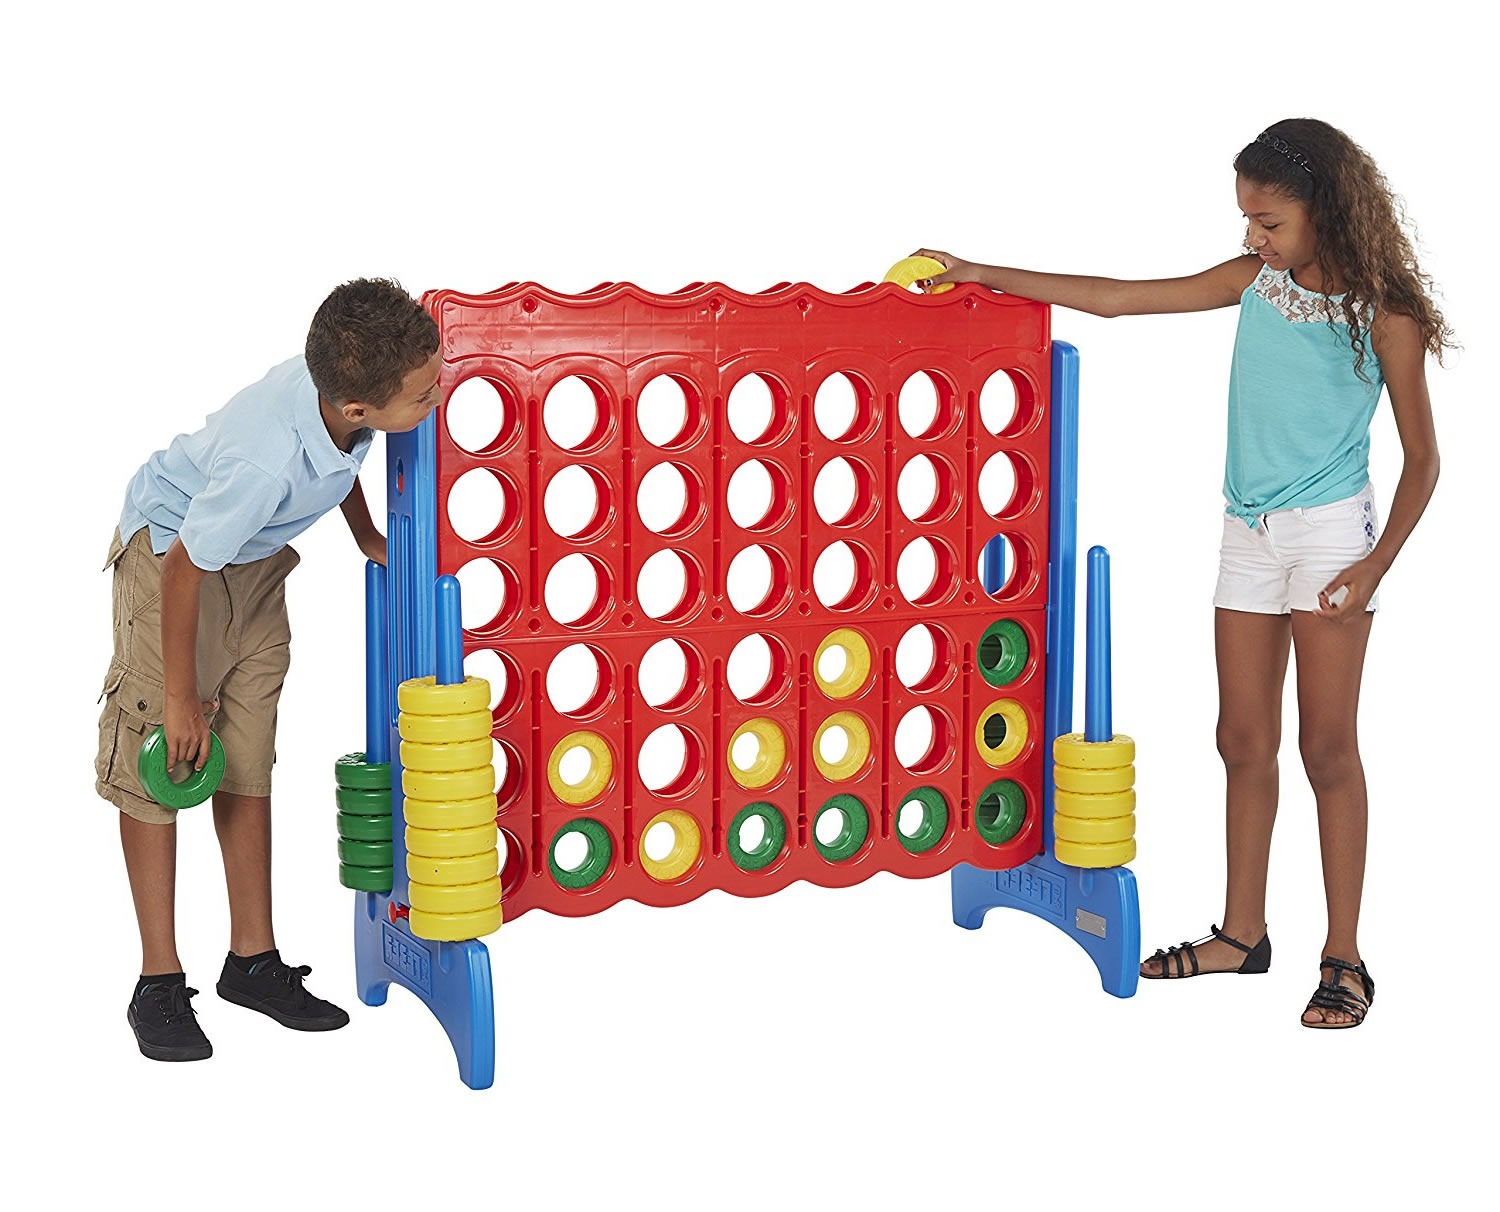 Gaint Connect 4 Game Fun Outdoors Kids Party Family Toy UK 